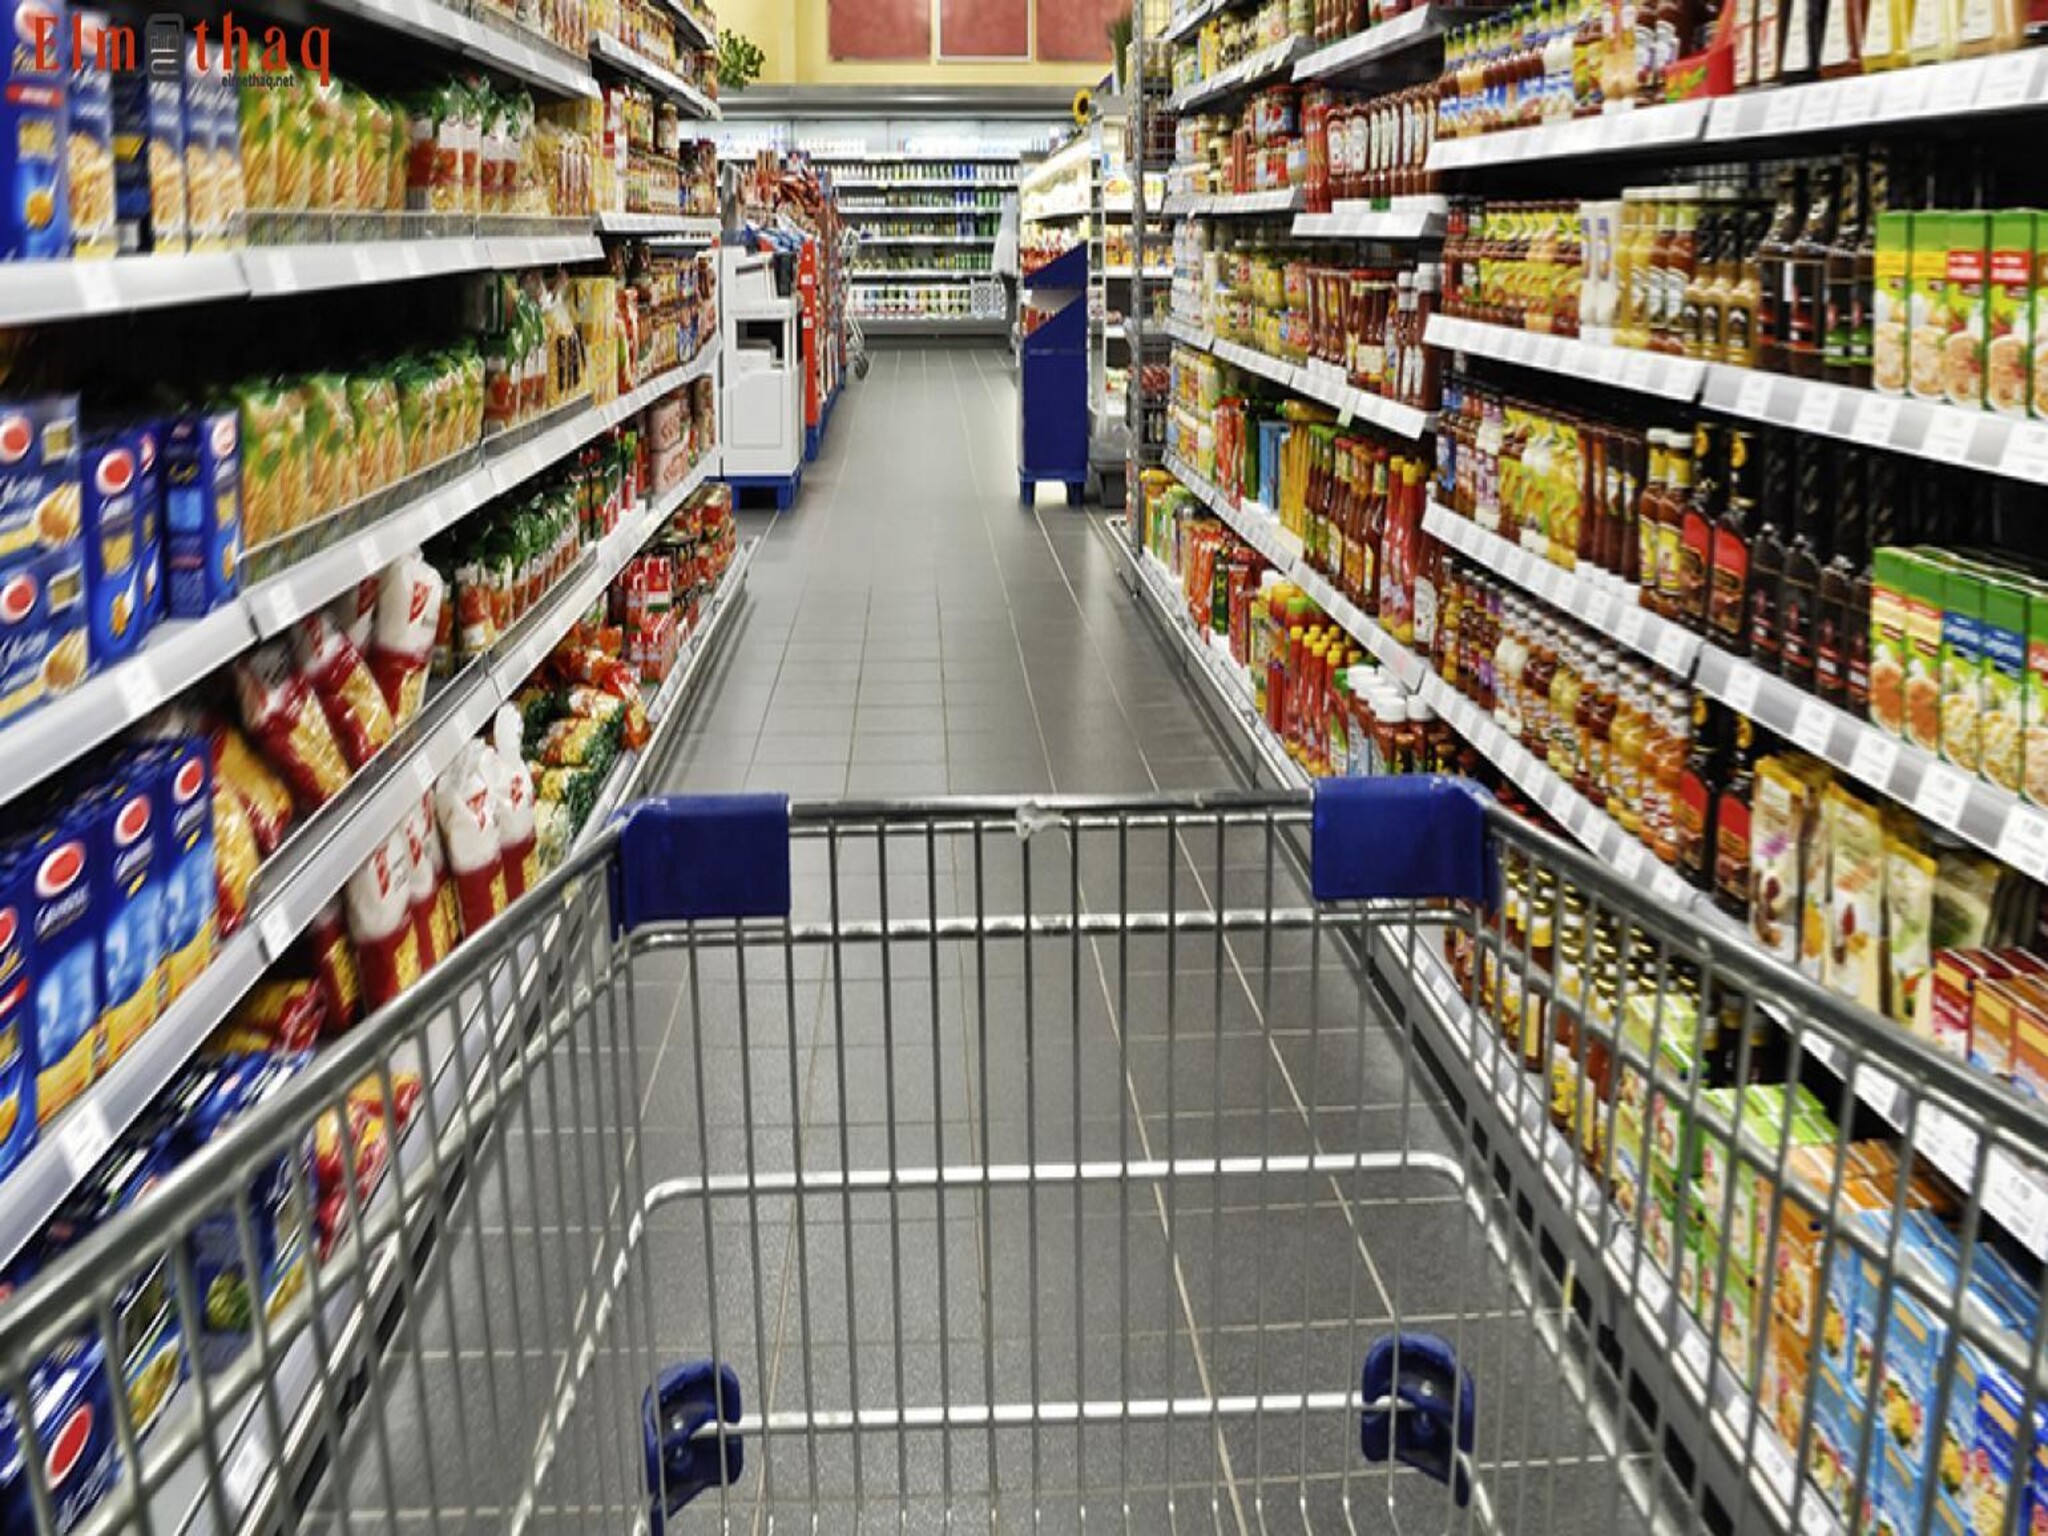 UAE: The Best 9 Smart Strategies for Grocery Shopping to Maximize Savings